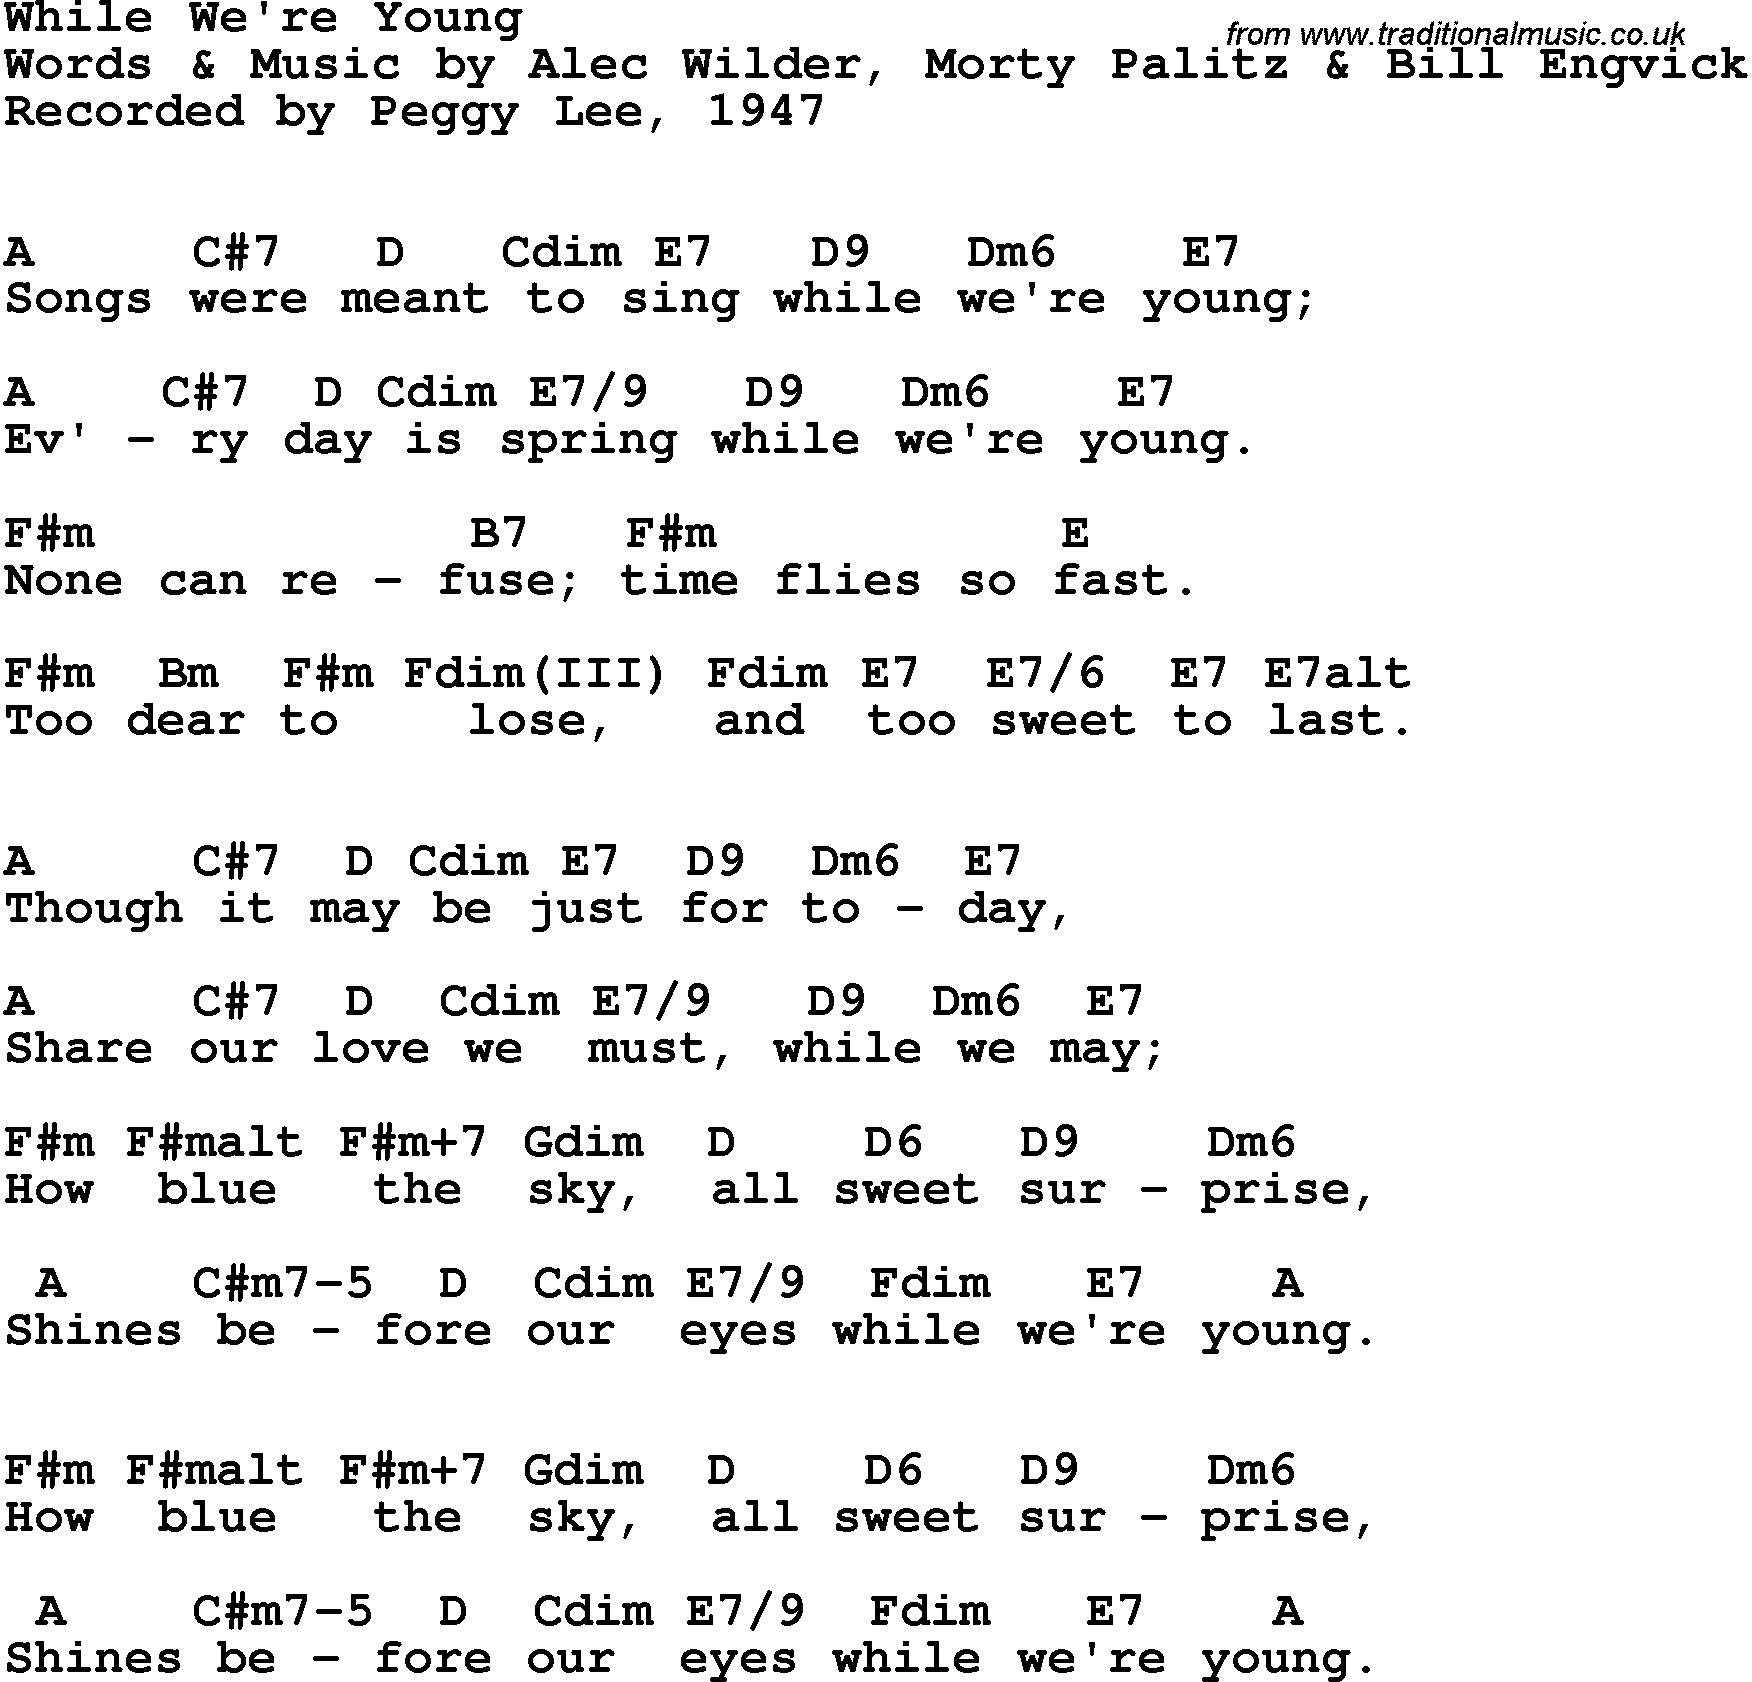 Song Lyrics with guitar chords for While We're Young - Peggy Lee, 1947